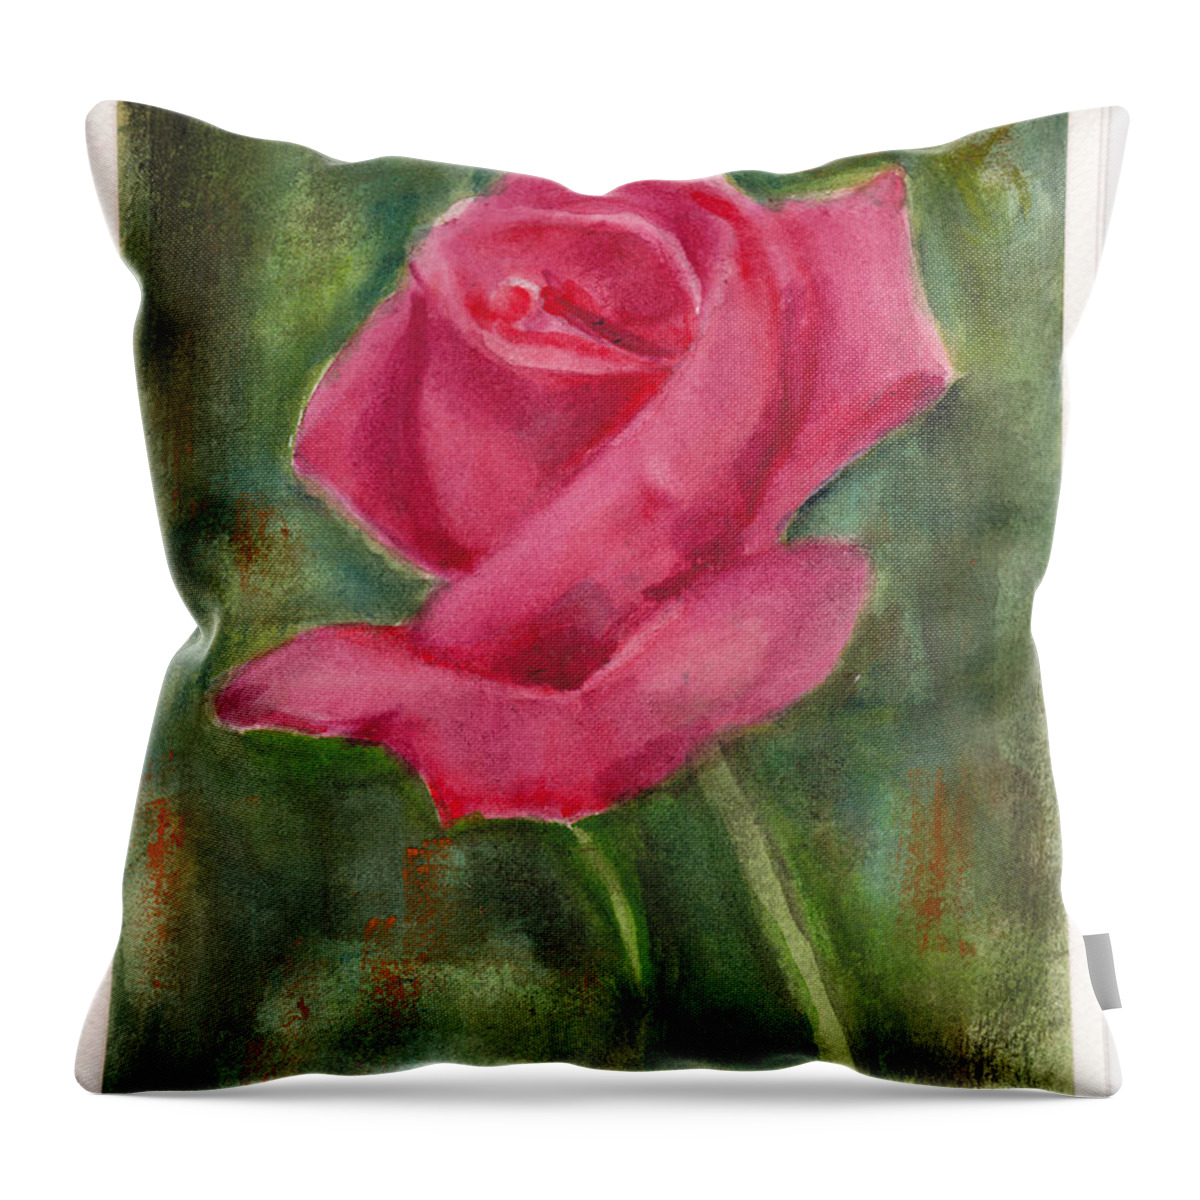 Flower Throw Pillow featuring the painting Red Valentine Rose 2015 by Dai Wynn